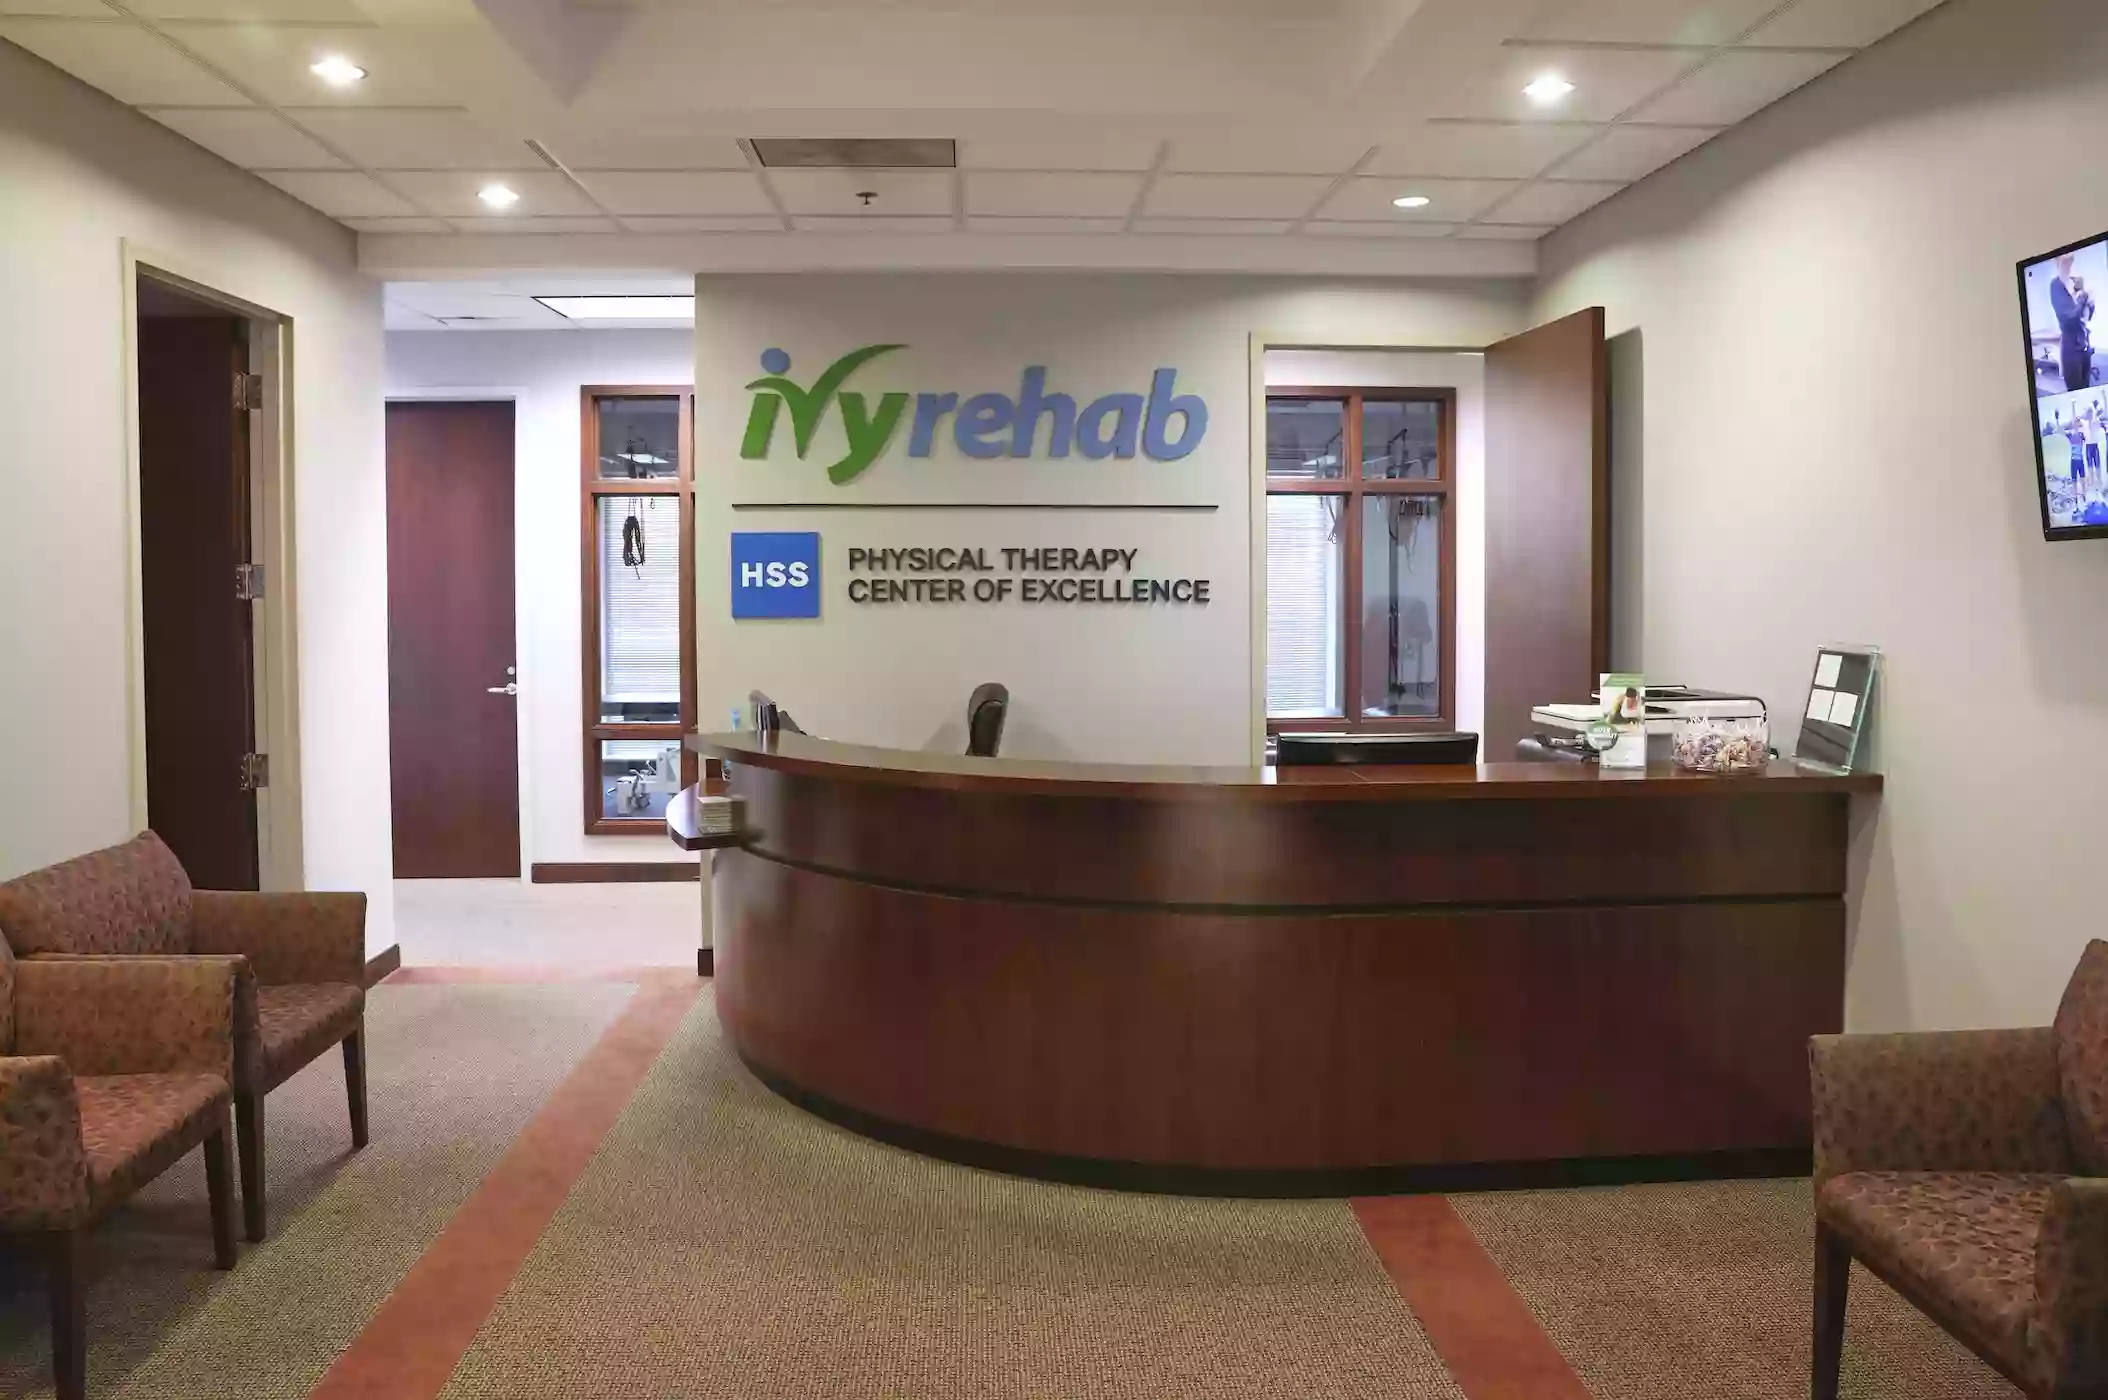 Ivy Rehab HSS Physical Therapy Center of Excellence